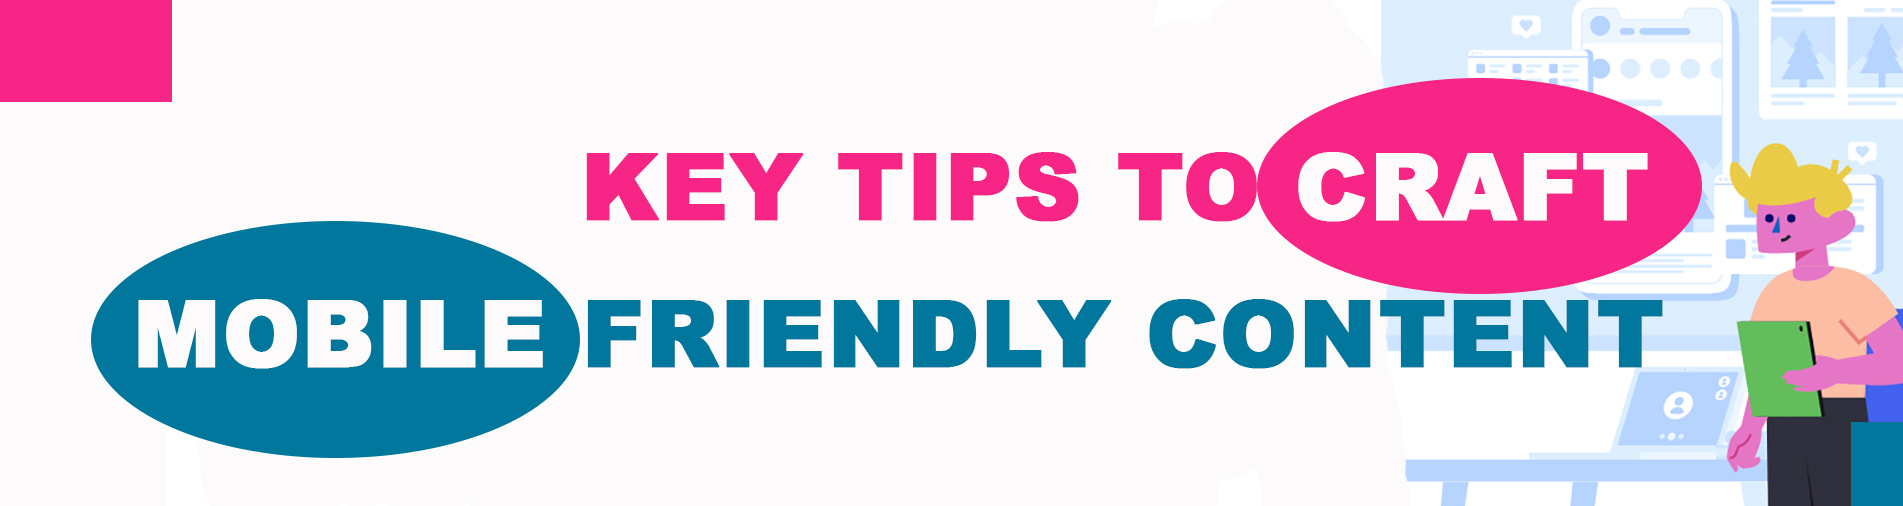 Key Tips to Craft Mobile-Friendly Content